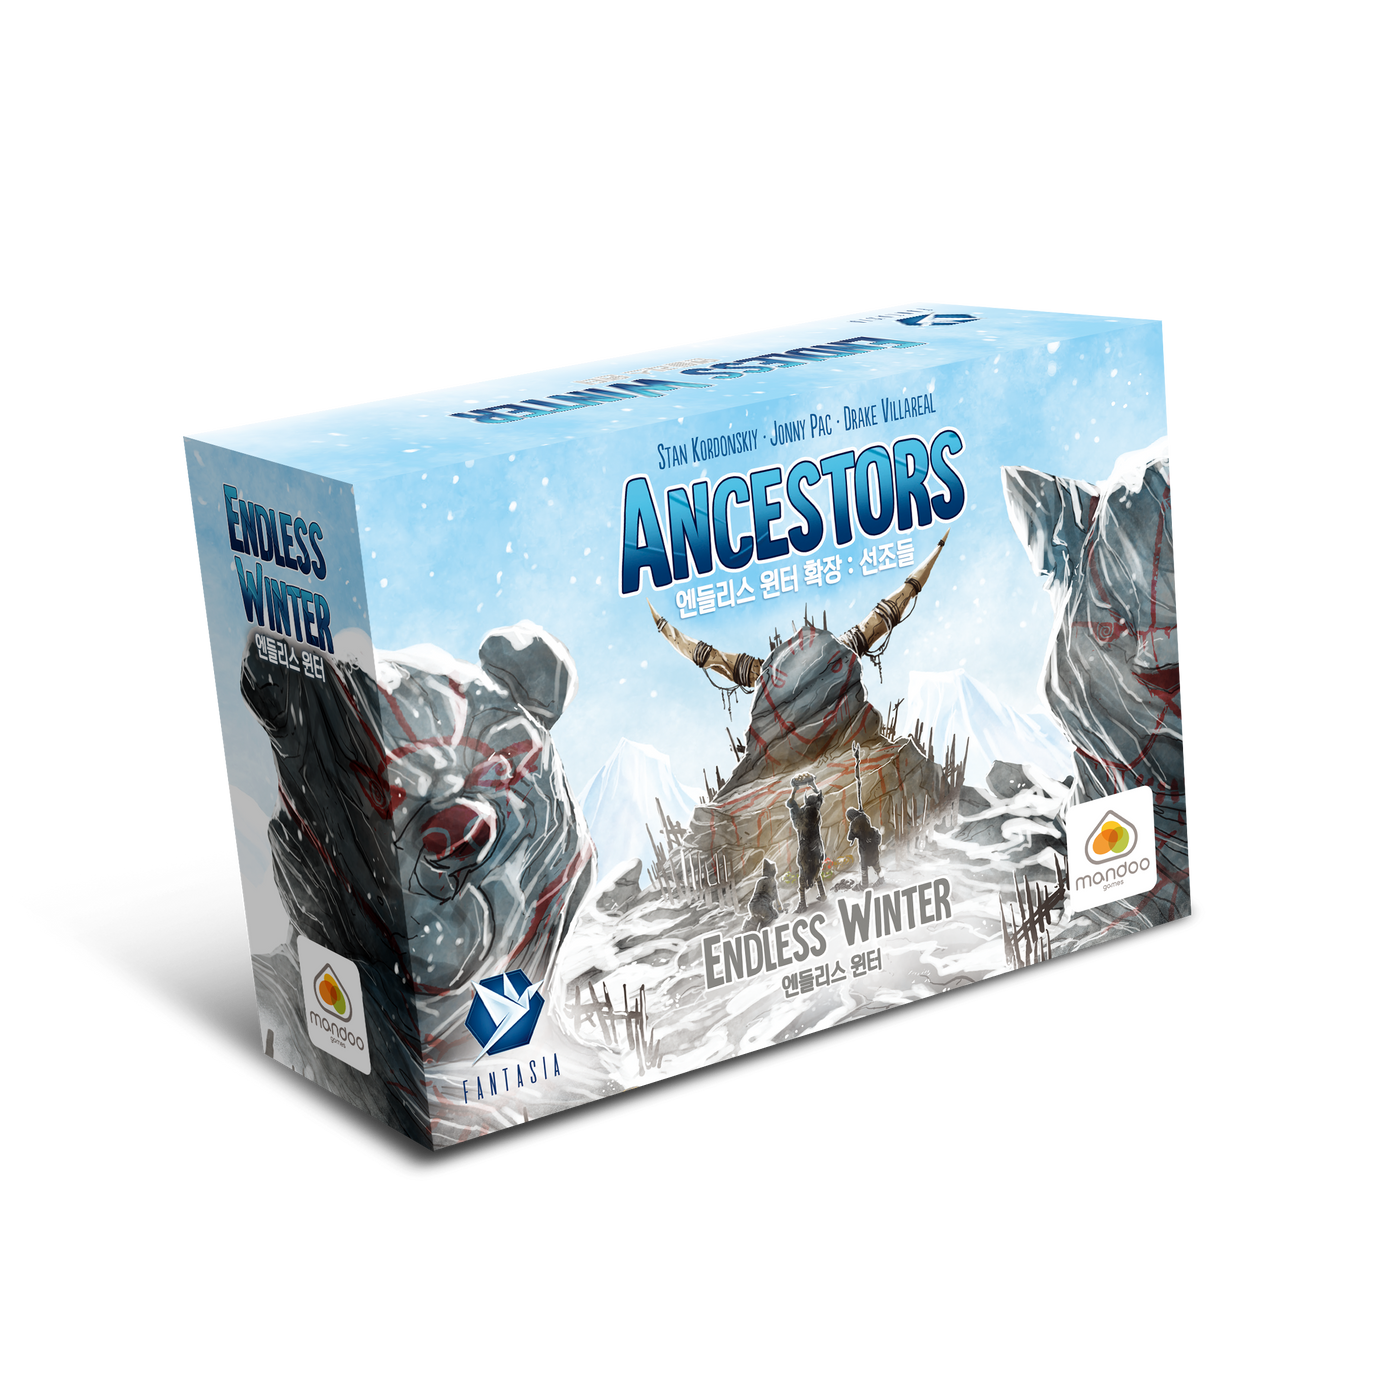 'Endless Winter' Paleoamericans Game Kickstarter Package (4boxes) | Prehistoric Territory Building Strategy Board Game